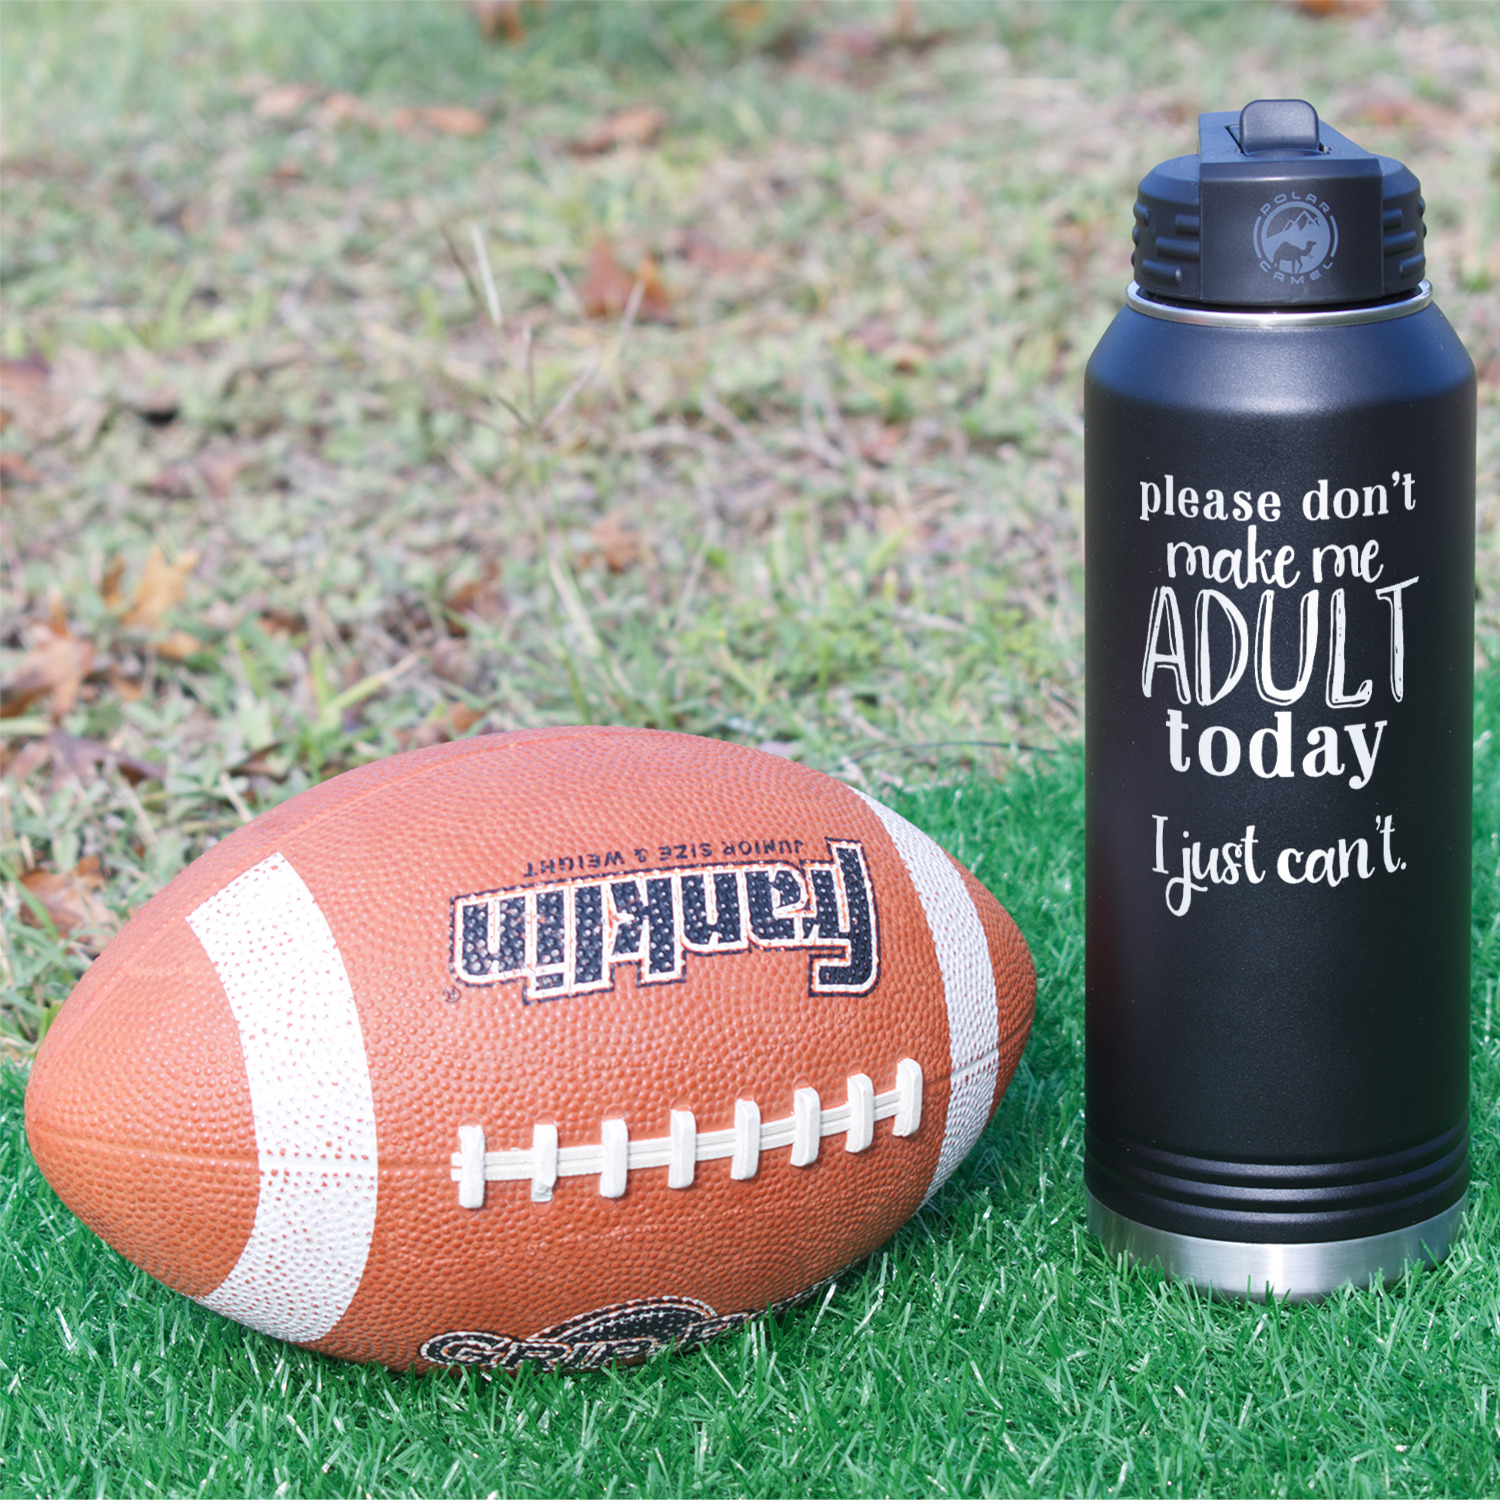 https://www.youcustomizeit.com/common/MAKE/1038321/Funny-Quotes-and-Sayings-Laser-Engraved-Water-Bottles-In-Context.jpg?lm=1667407678